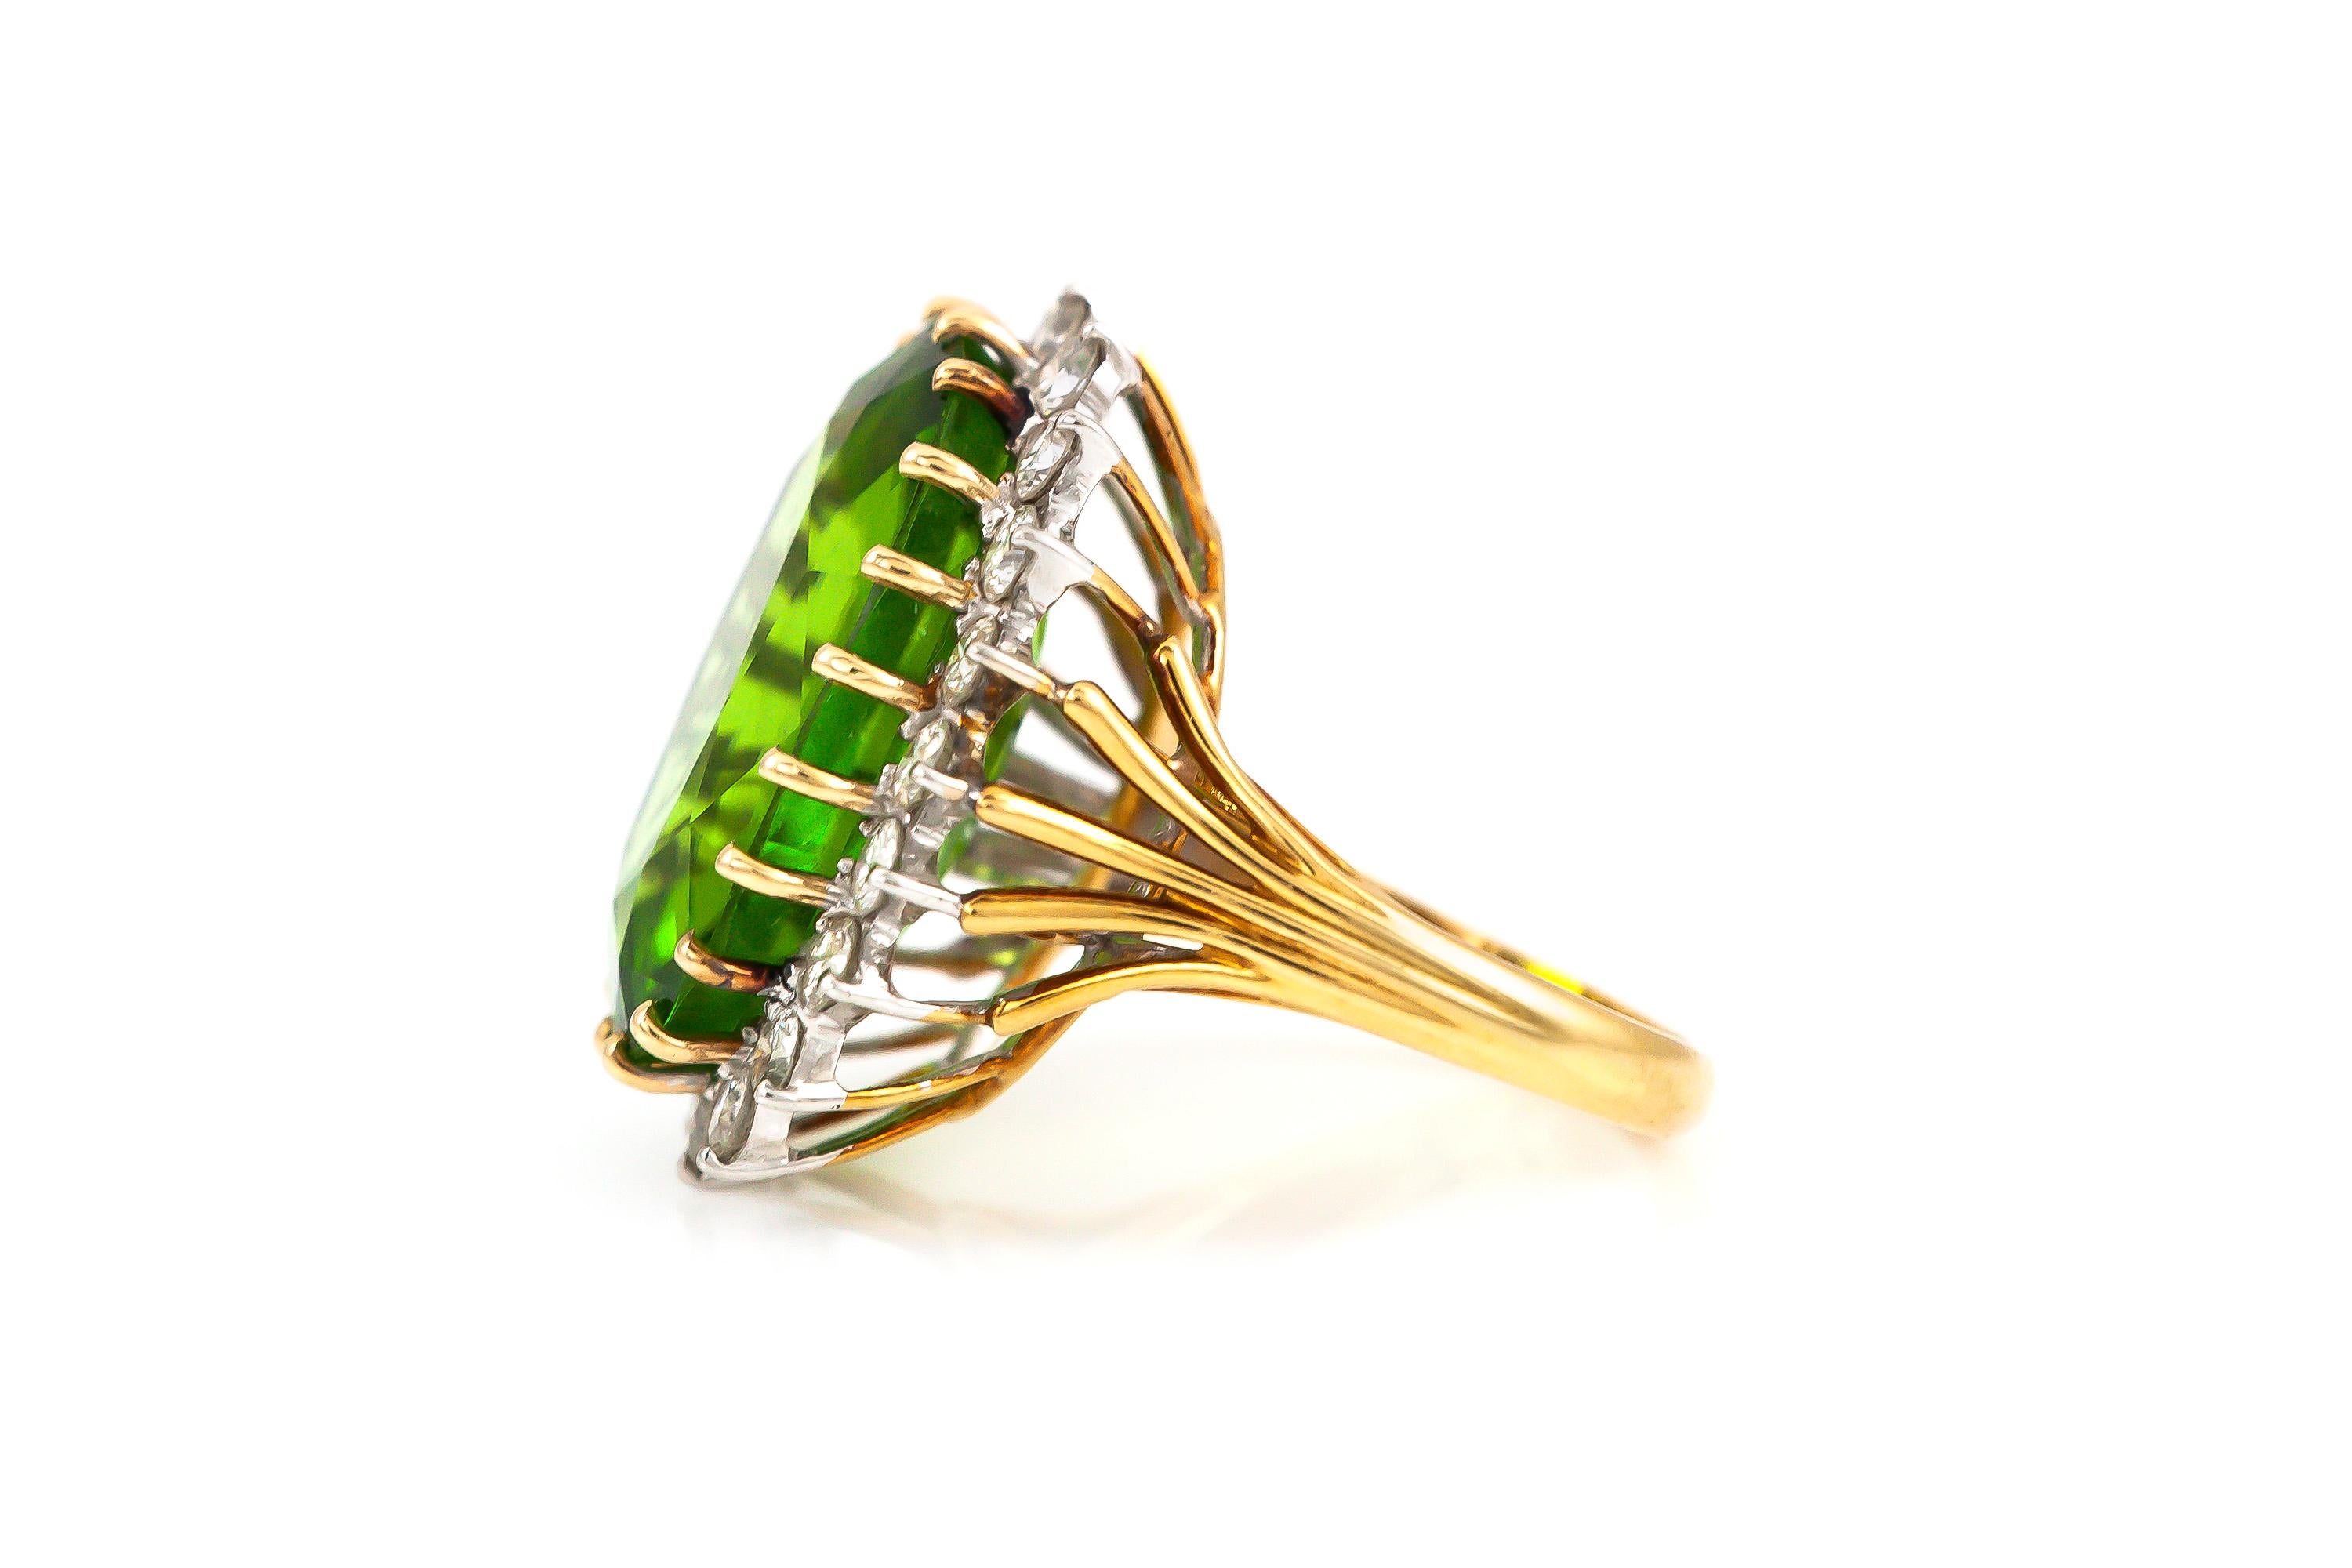 Finely crafted in 18k yellow and white gold with an Oval cut Peridot weighing approximately 12.00 carats.
The center stone is flanked by Round brilliant cut diamonds weighing approximately a total of 1.00 carats.
Size 6 1/2, resizable